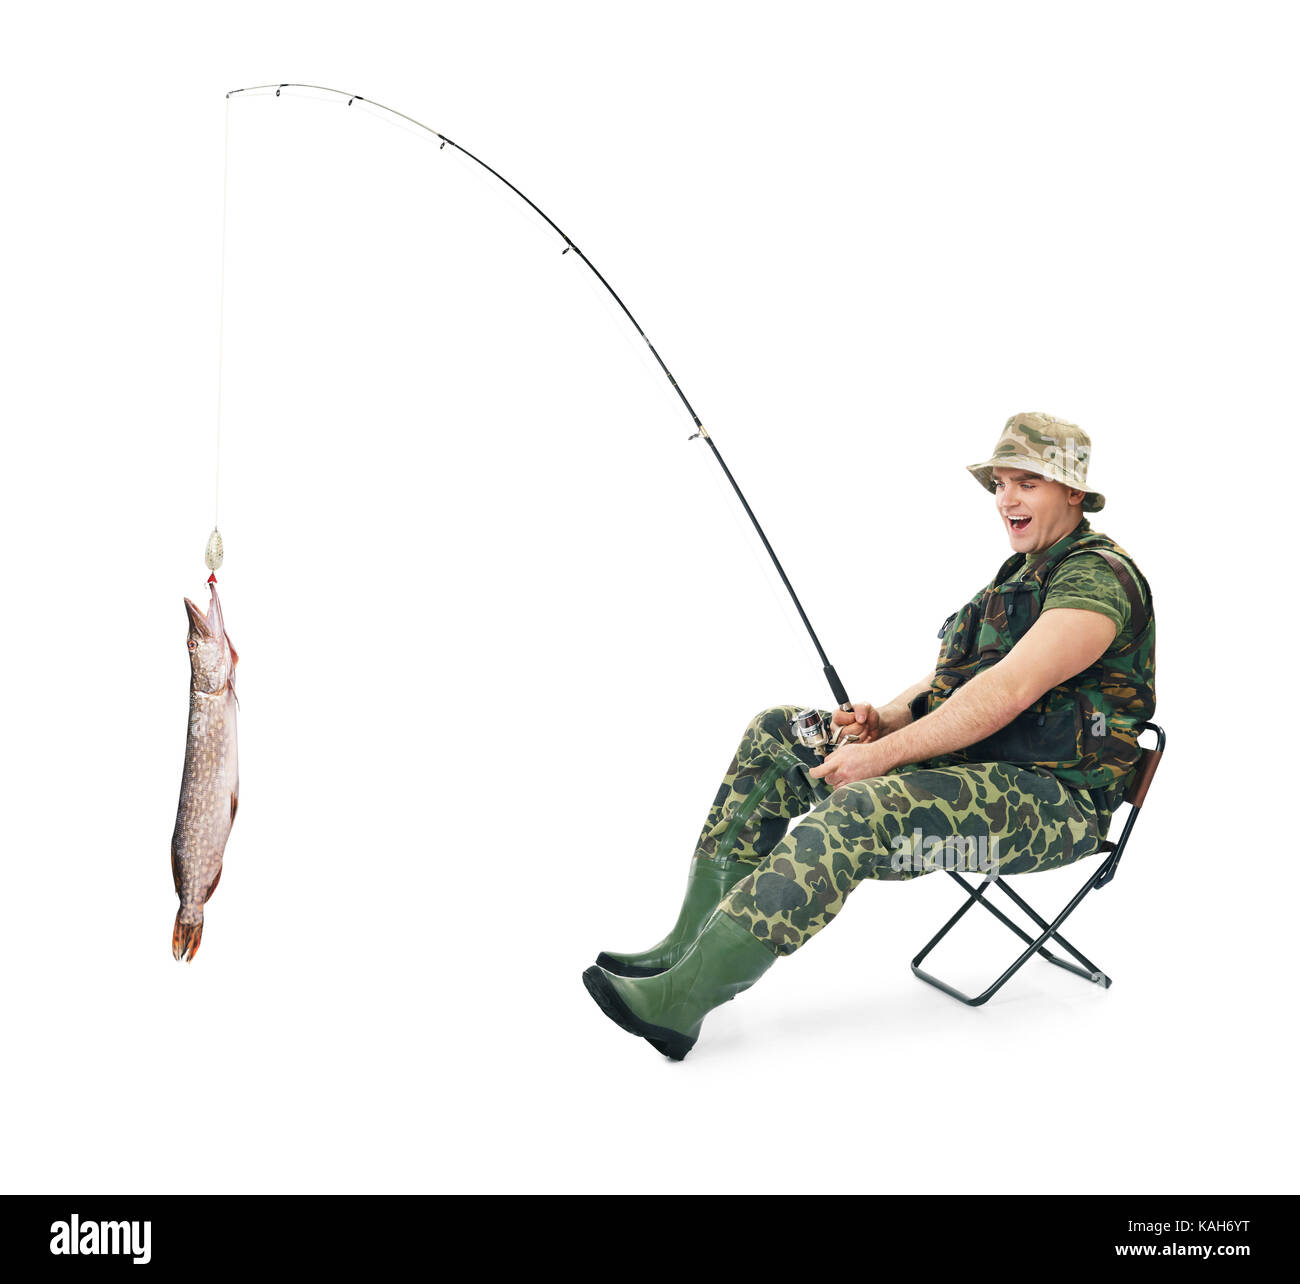 Pensive Fisherman In Camo Outfit Carrying Fishing Pole While Going Fishing  With Dog In Summer Day Stock Photo - Download Image Now - iStock